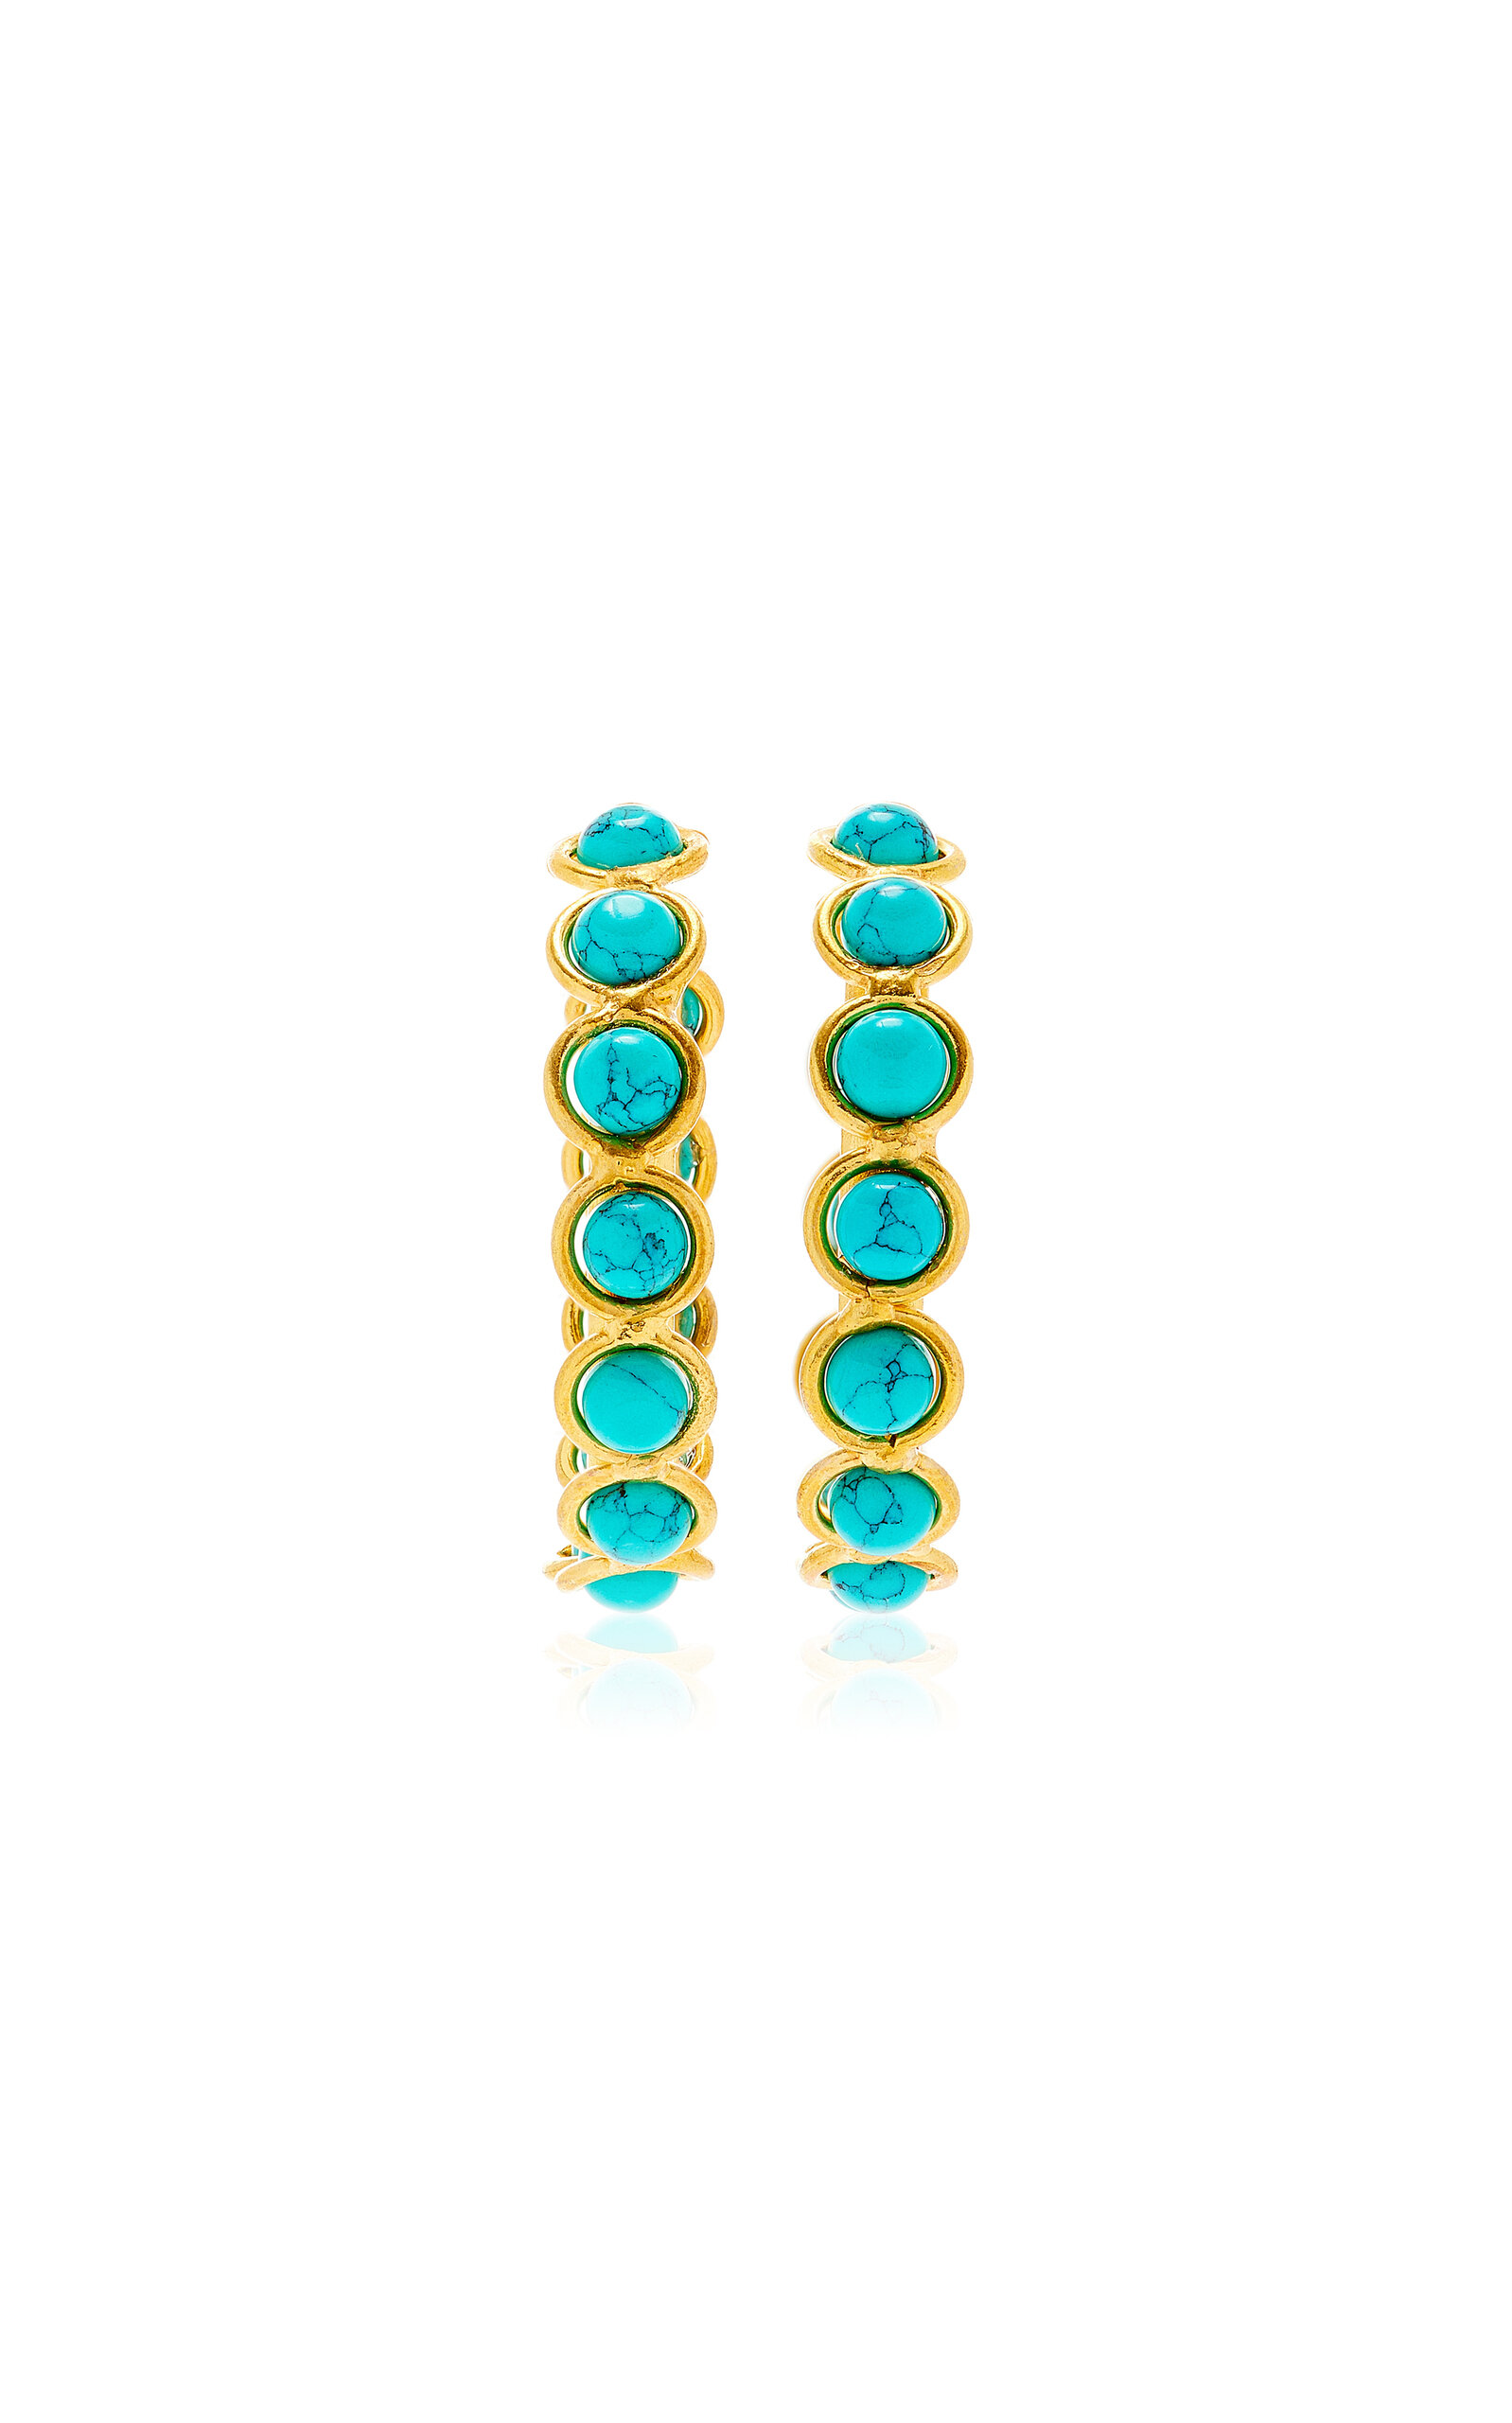 Sylvia Toledano Candies 22k Gold-plated Turquoise Earrings